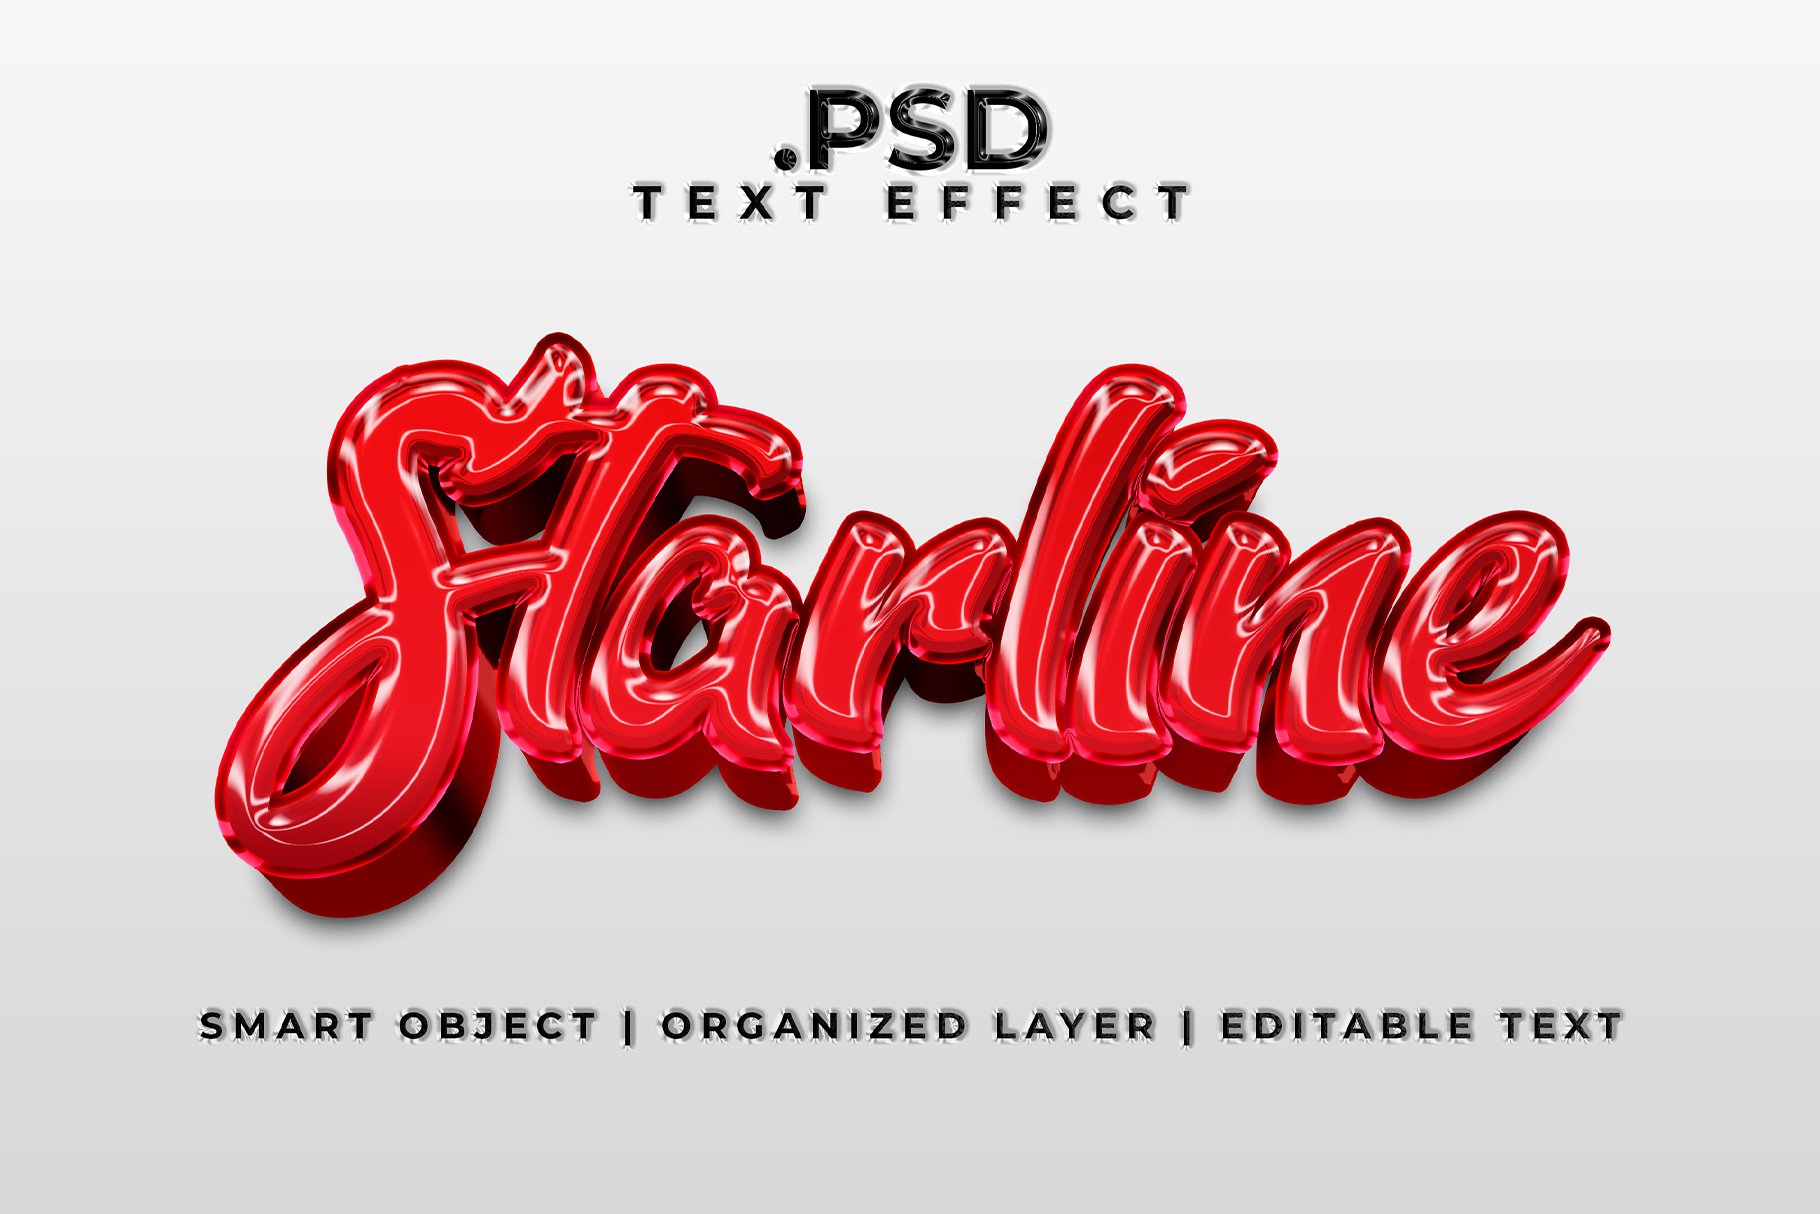 Starline Text Effectcover image.